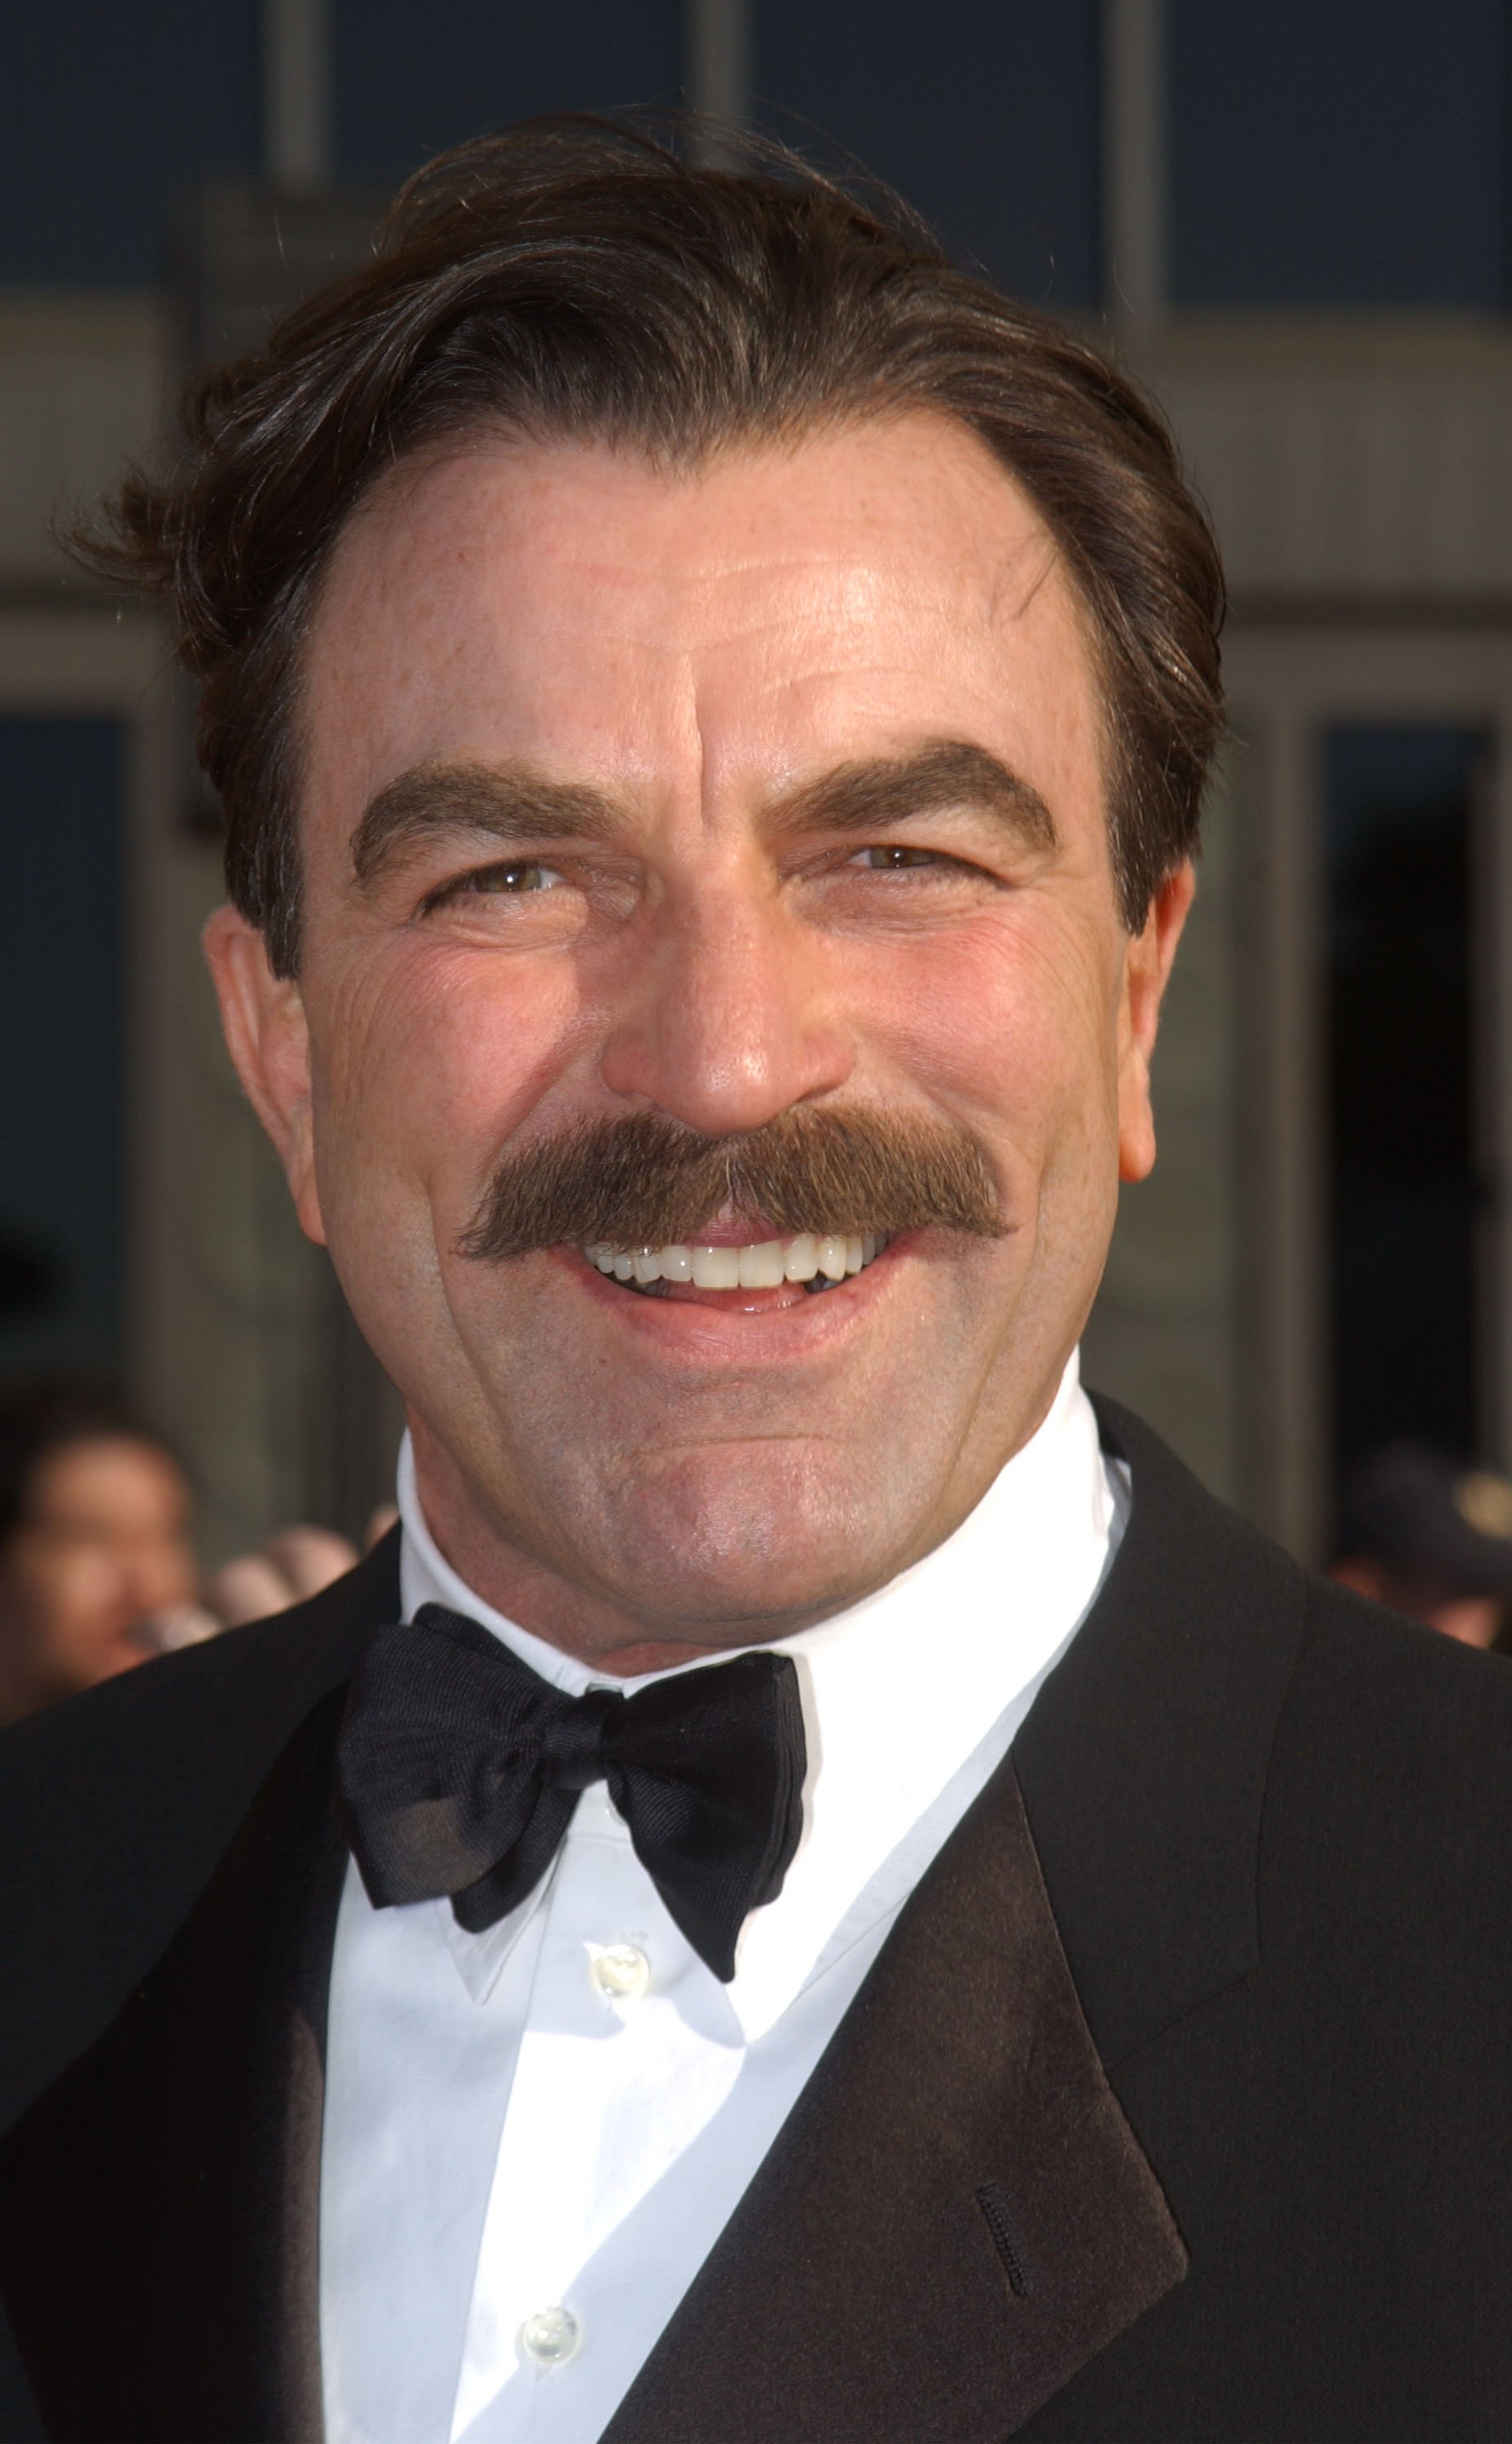 Tom Selleck attends the 8th Annual Screen Actors Guild Awards at the Shrine Auditorium March 10, 2002 | Photo: GettyImages